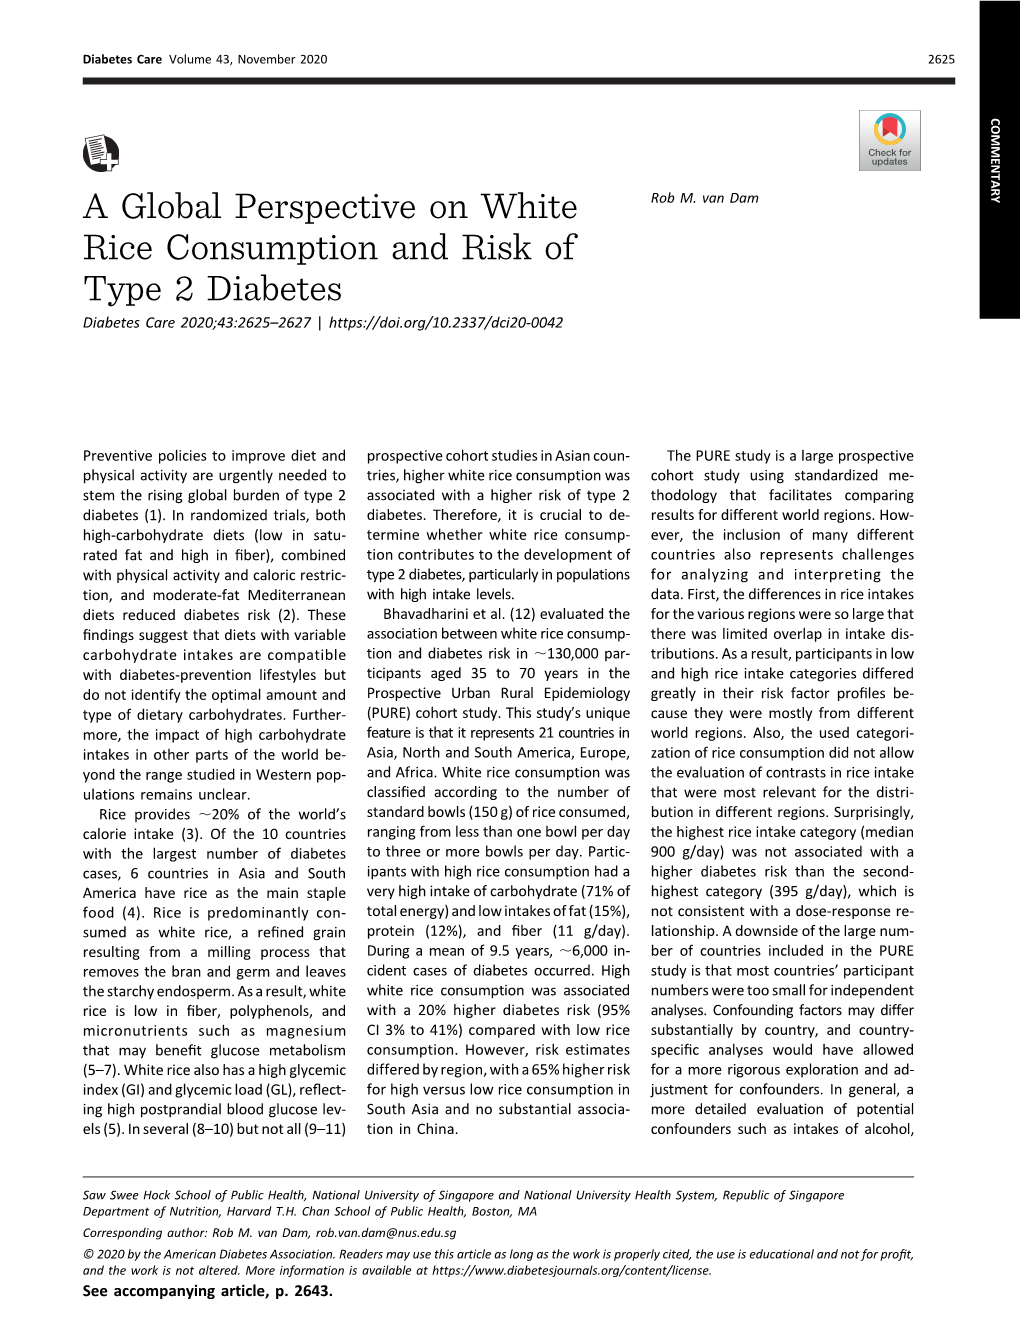 A Global Perspective on White Rice Consumption and Risk of Type 2